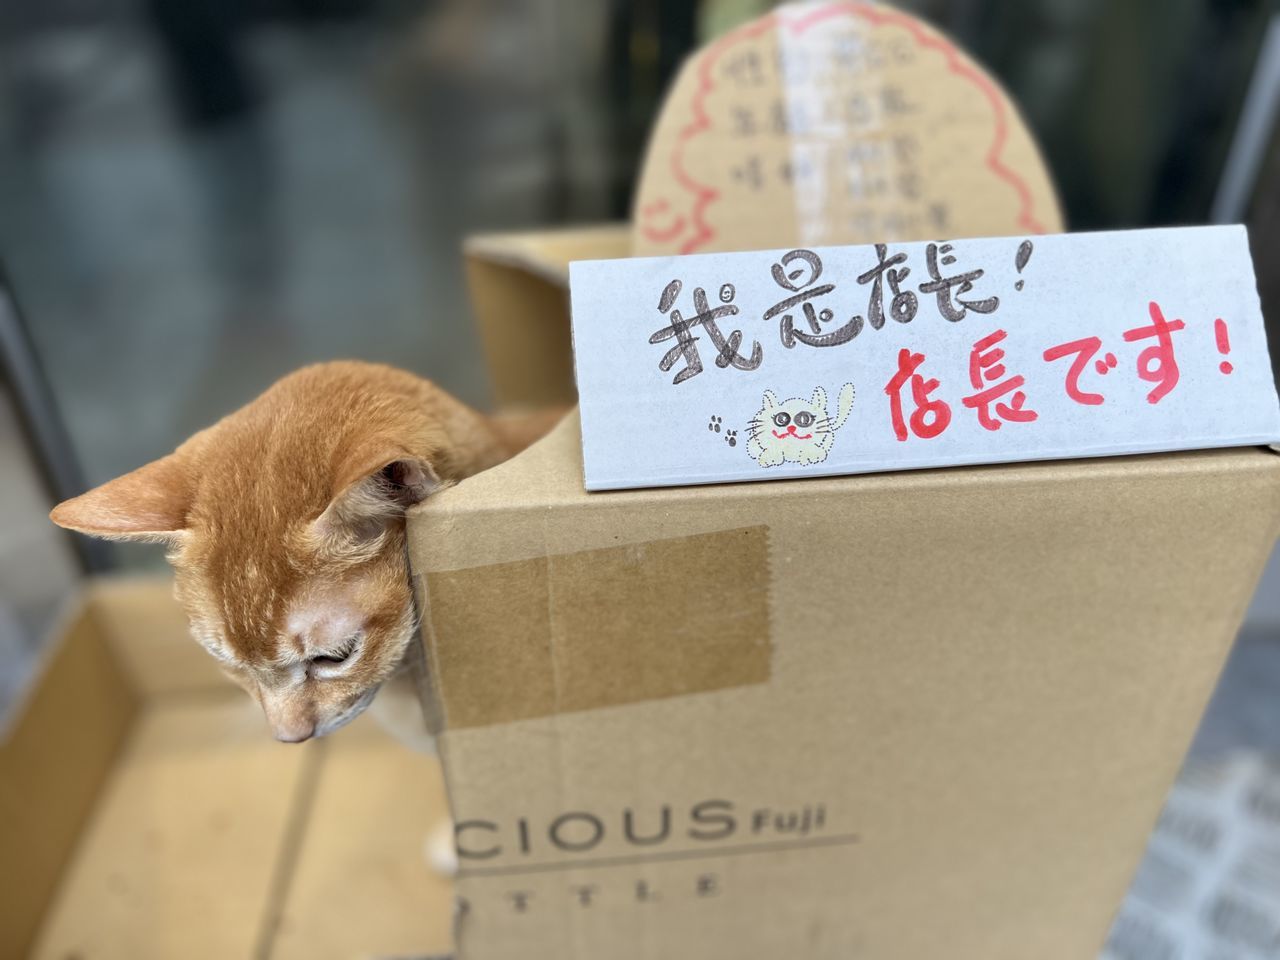 cat, animal, animal themes, cardboard, mammal, text, box, cardboard box, communication, no people, one animal, handwriting, container, carnivore, pet, domestic animals, western script, paper, focus on foreground, sign